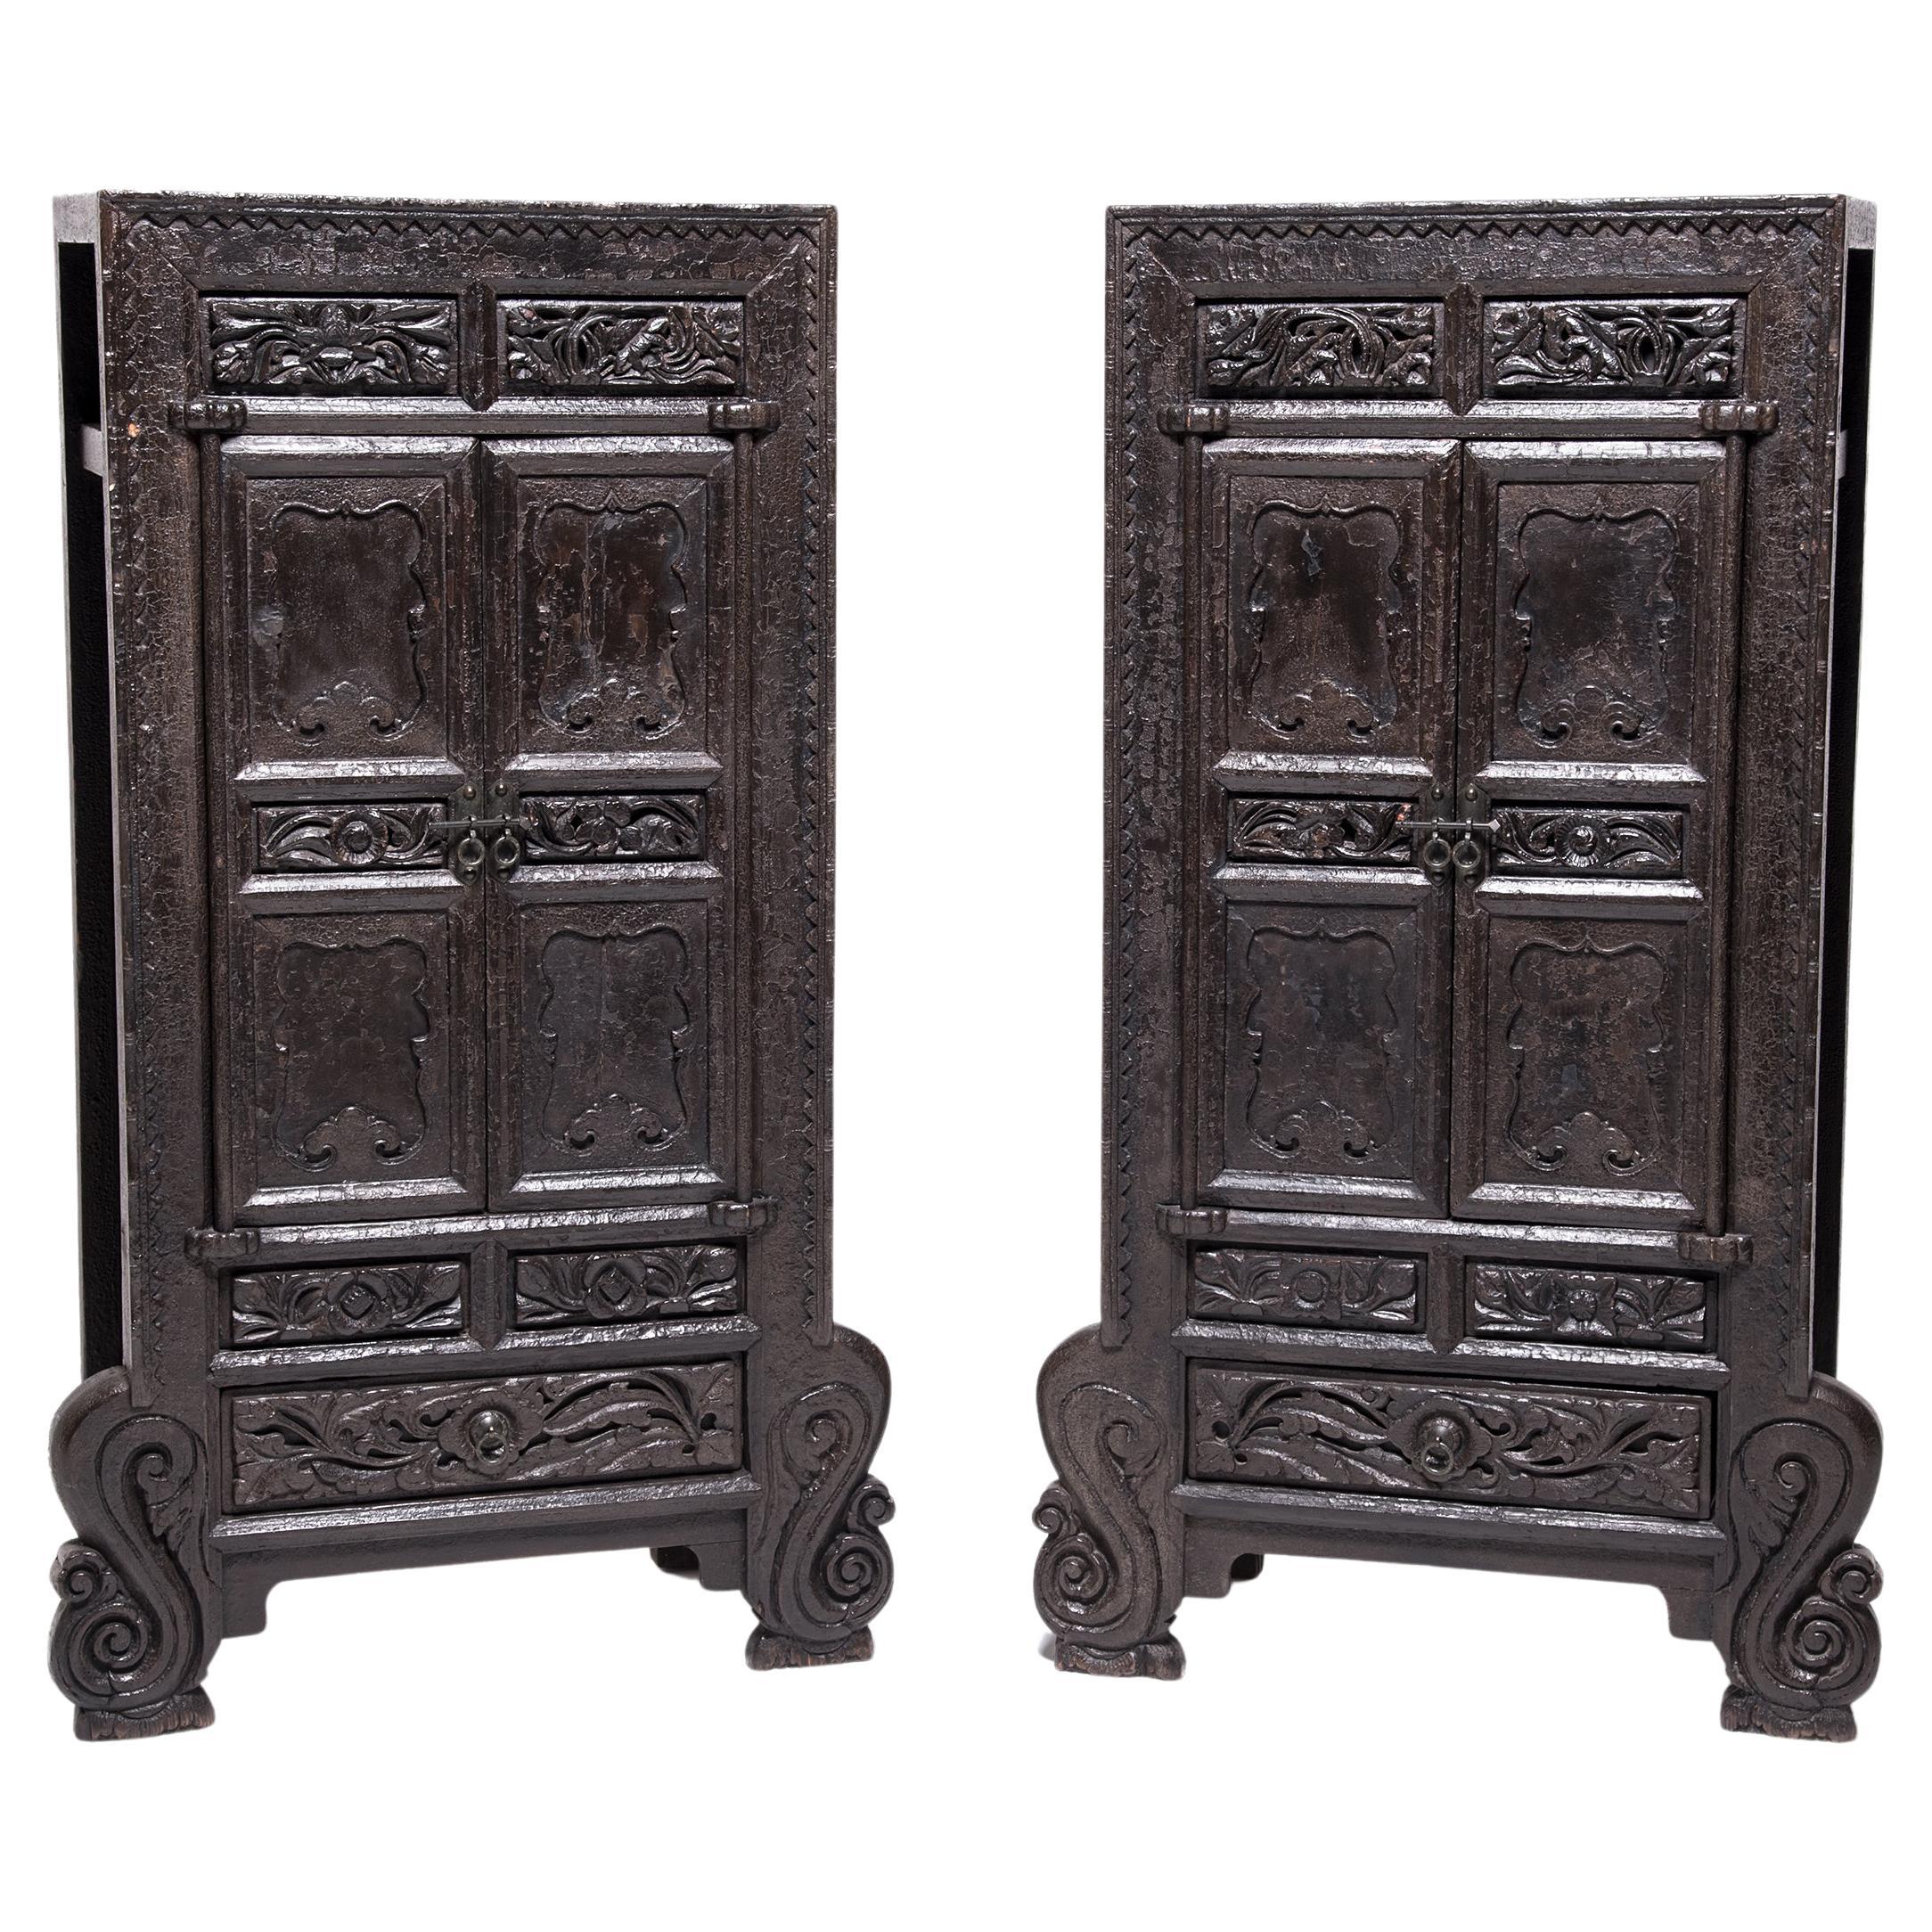 Pair of Ornate Lacquered Cabinets with Cabriole Legs, c. 1850